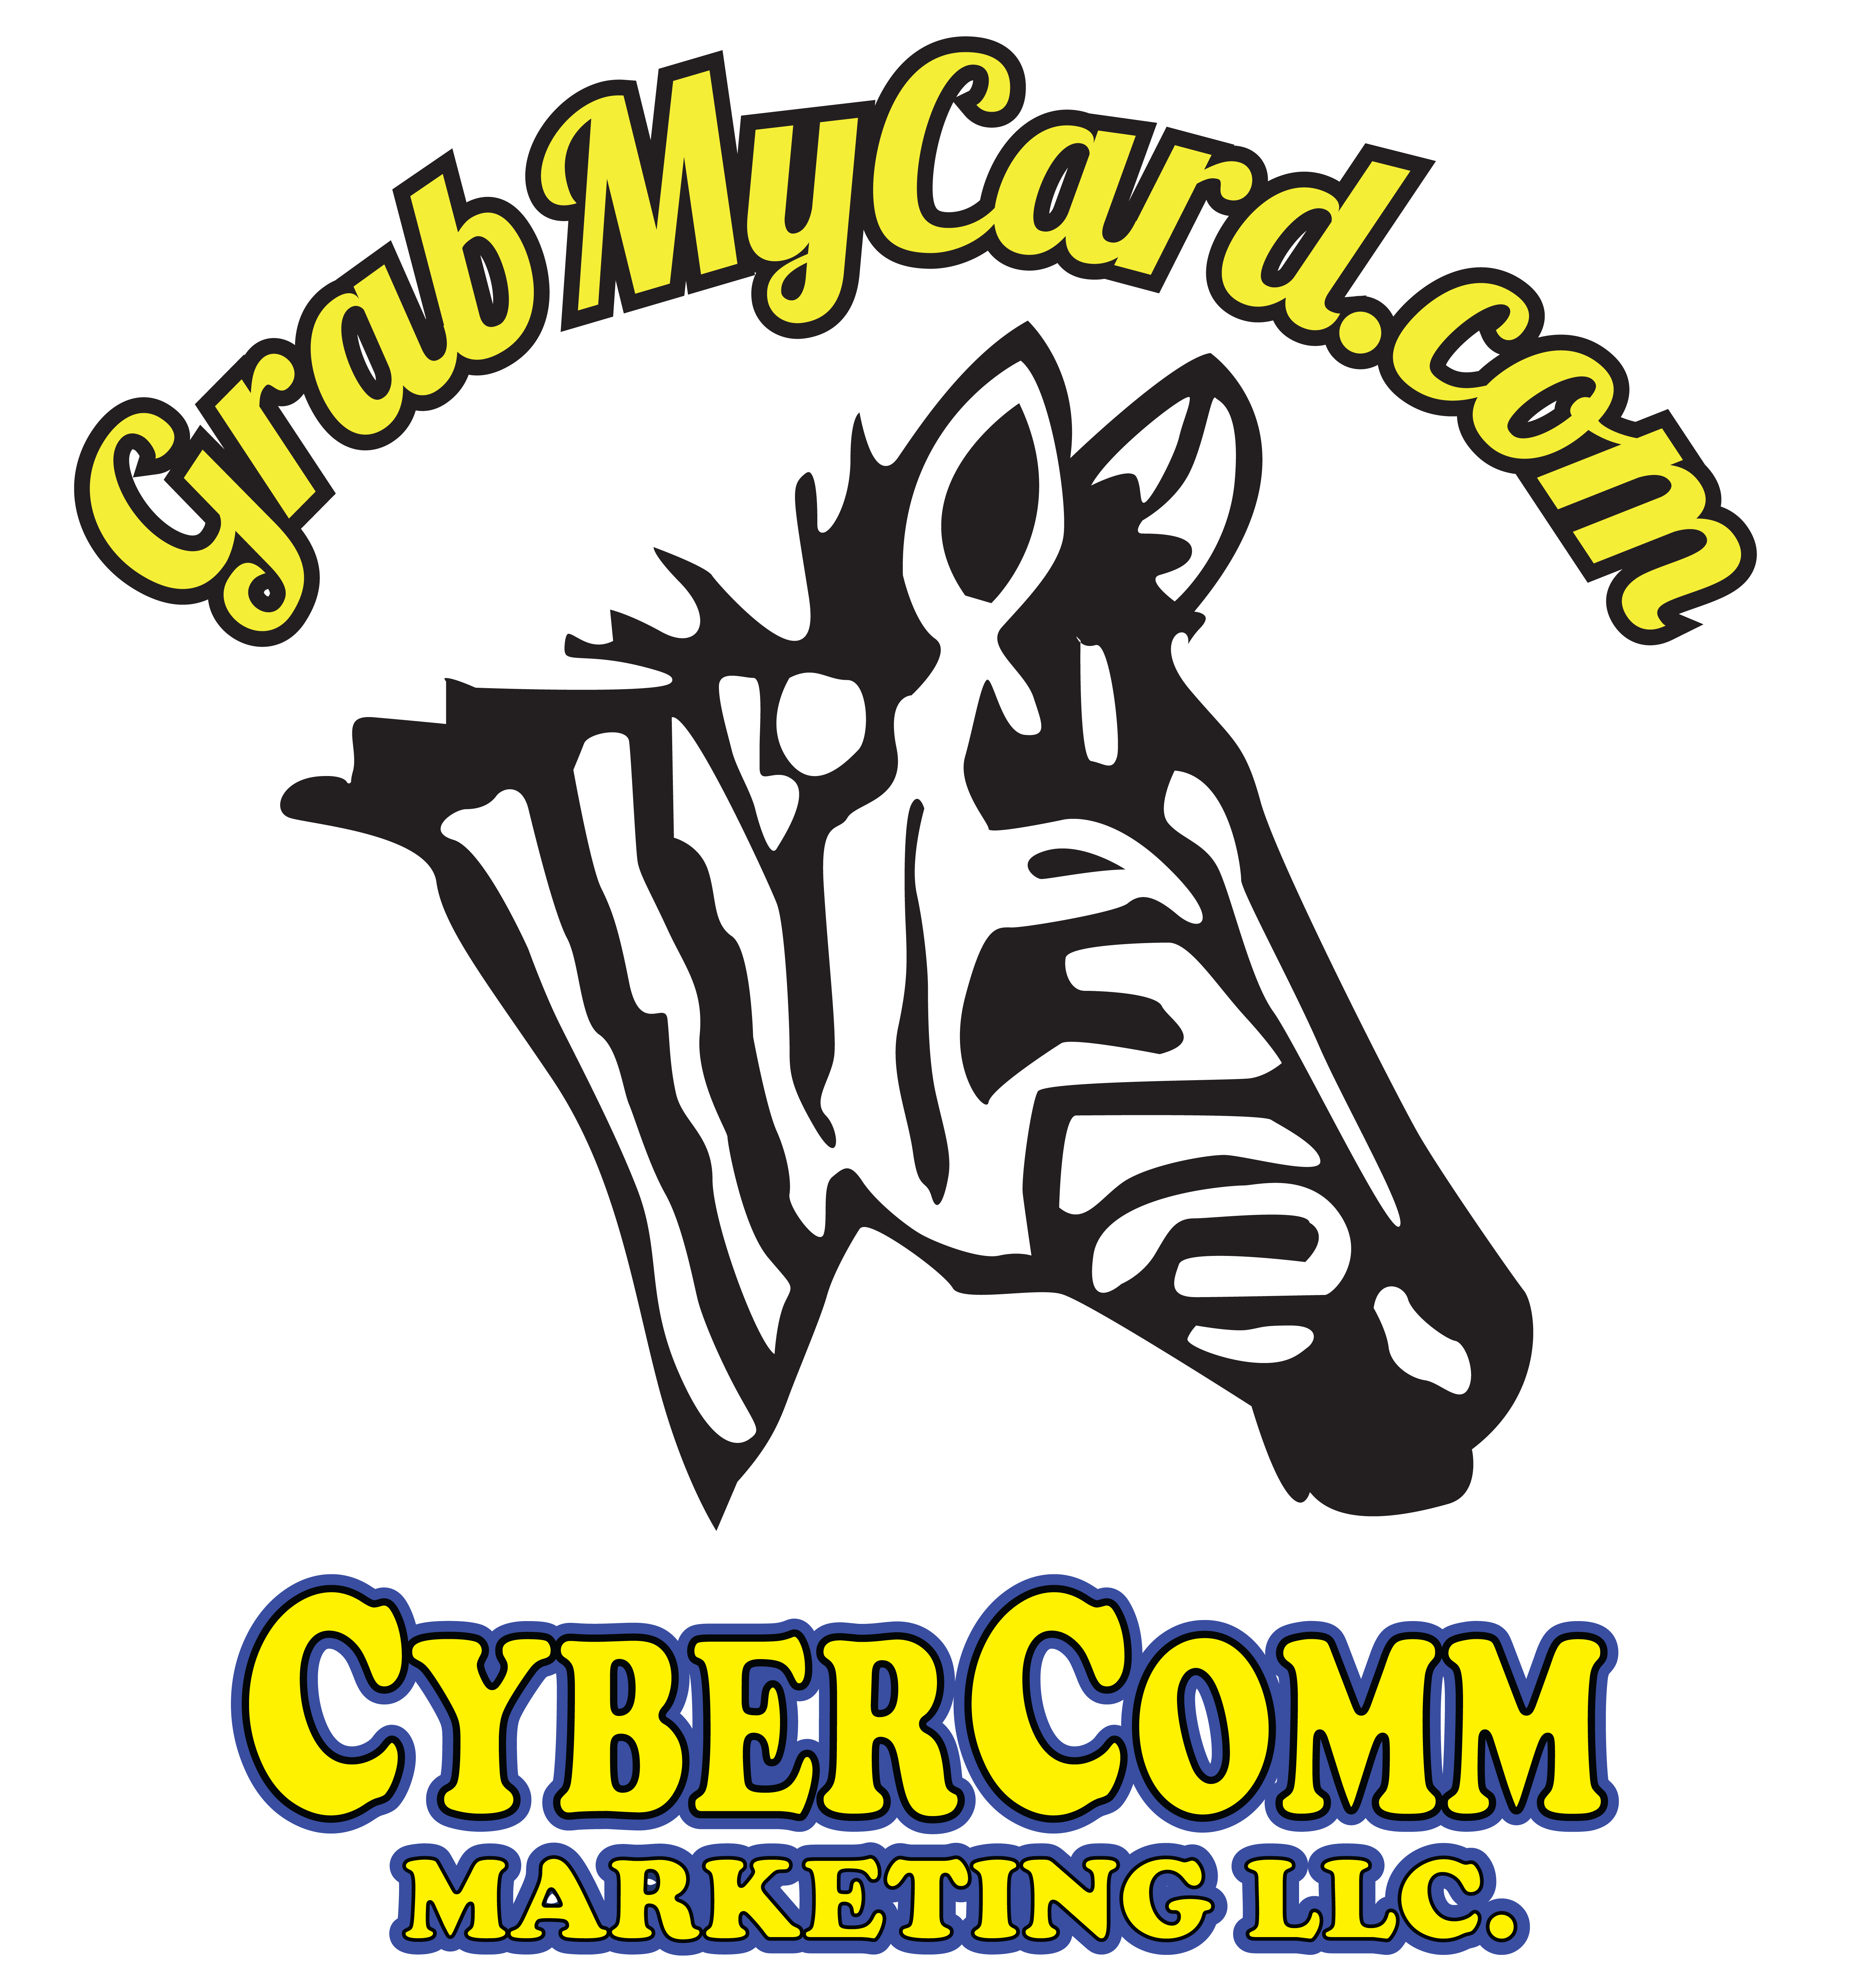 Business cards for Bulldog fans everywhere by GrabMyCard.com and CyberComm Marketing LLC is the business card that will never get lost